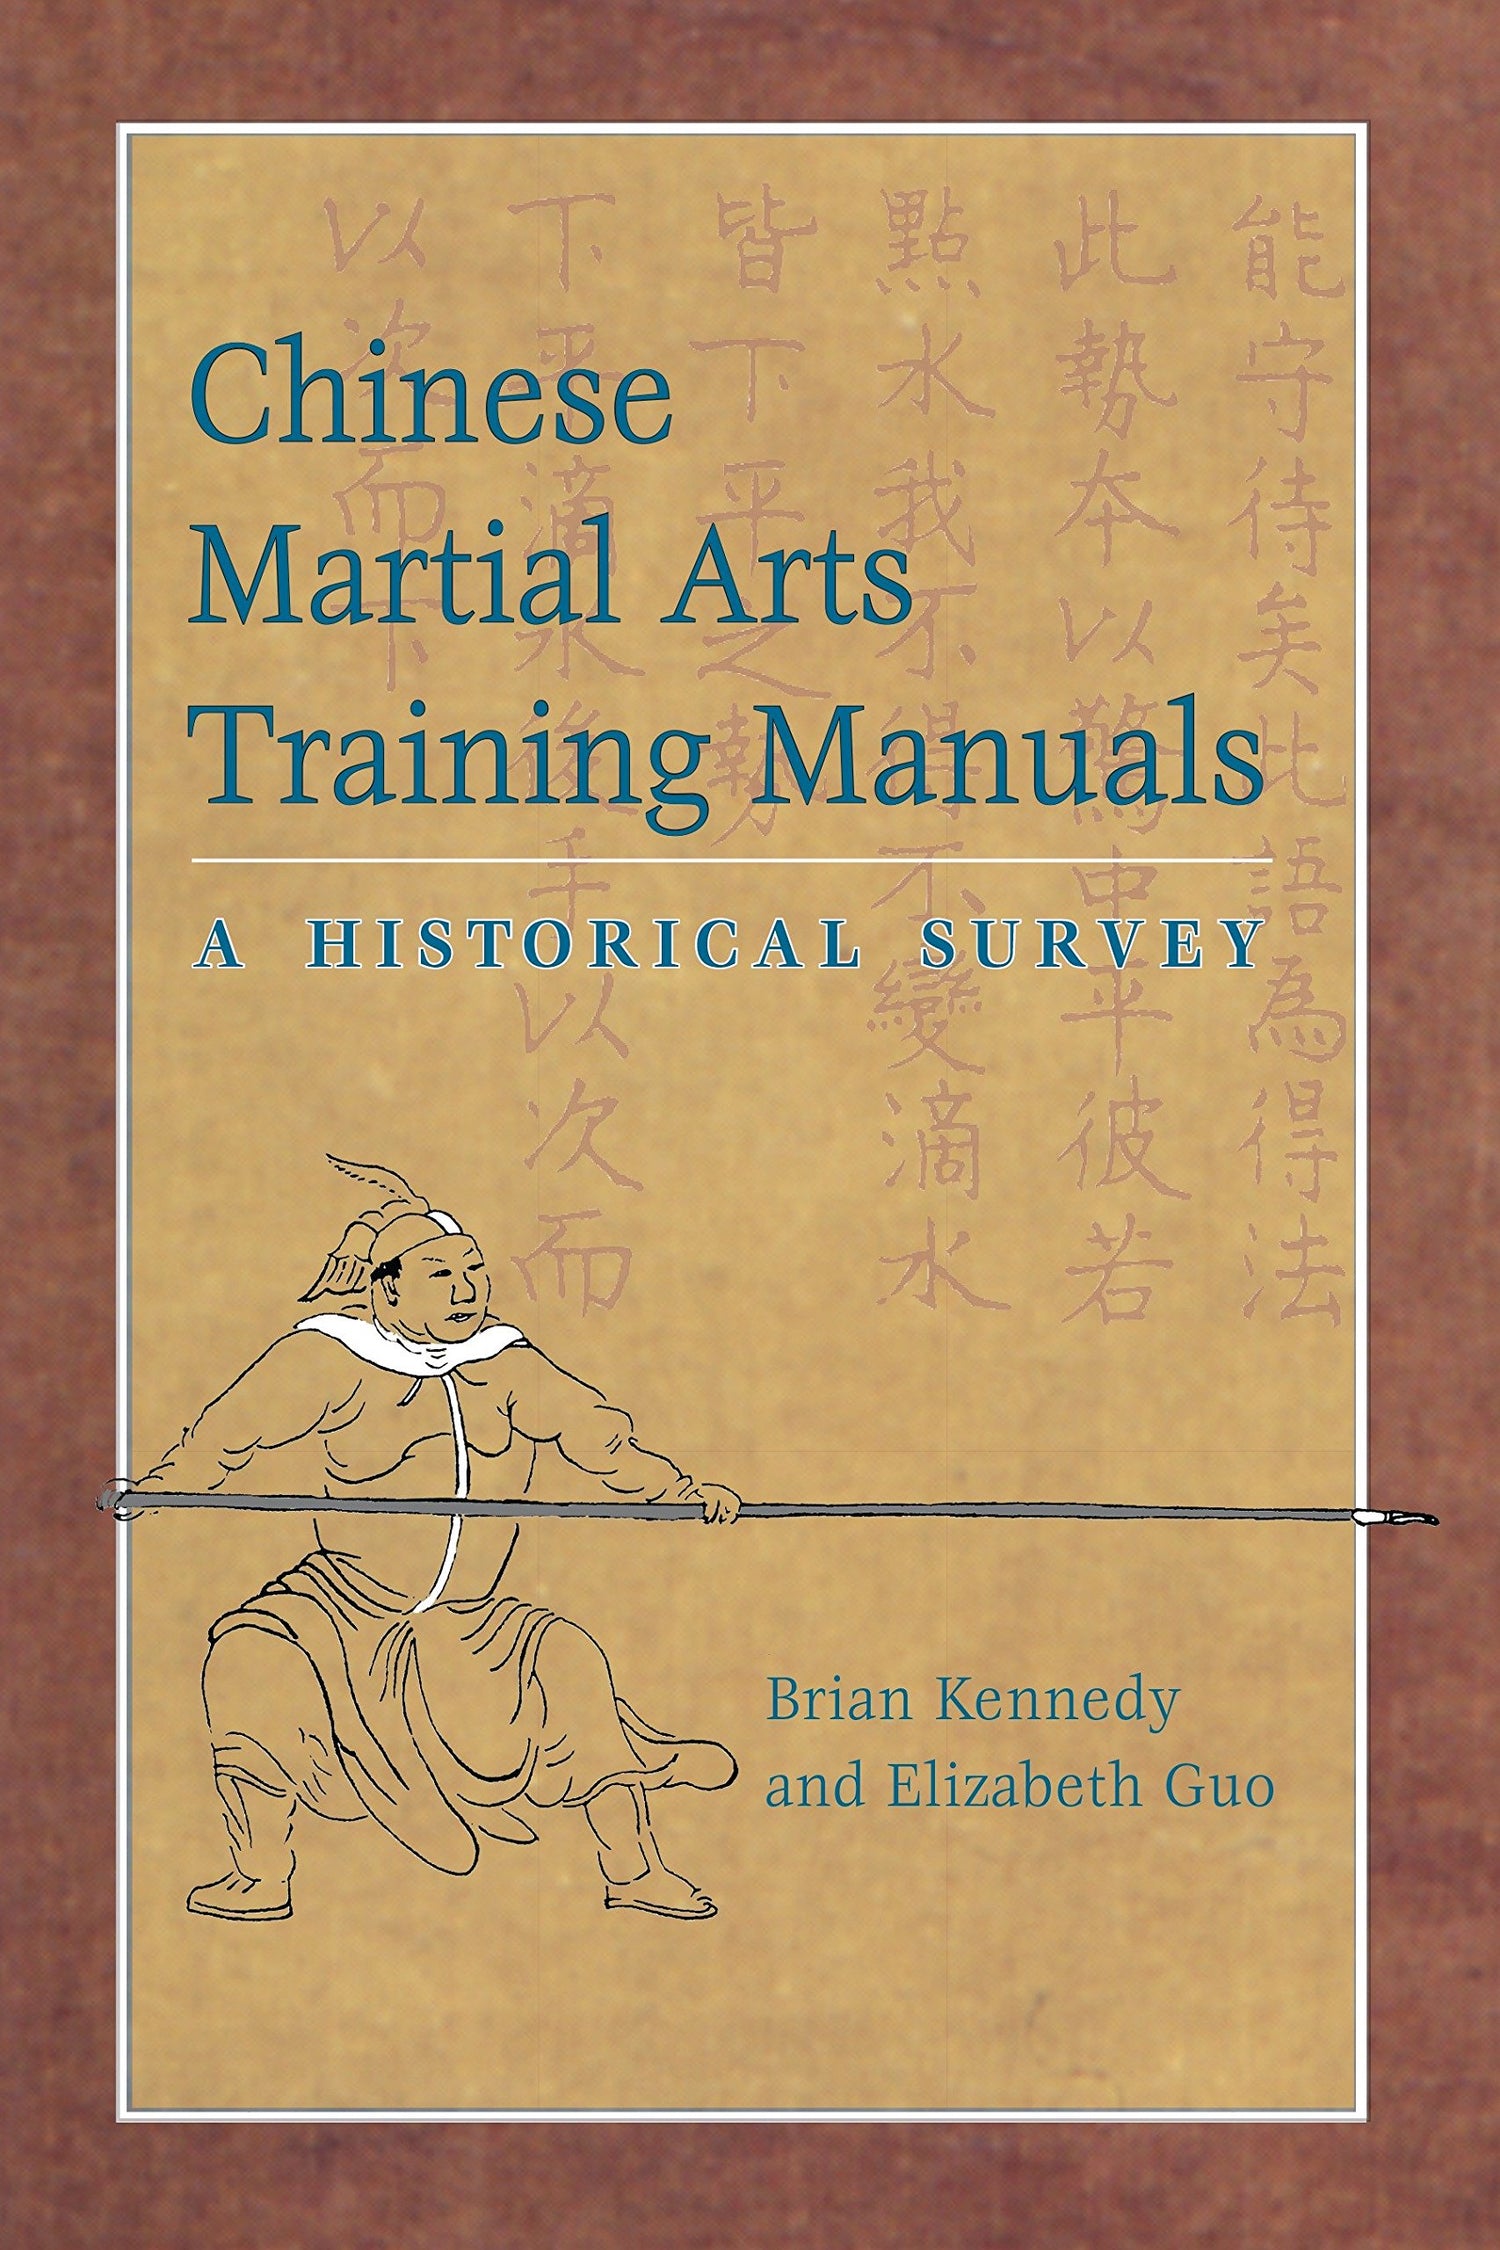 Chinese Martial Arts Training Manuals: A Historical Survey Book by Brian Kennedy - Budovideos Inc